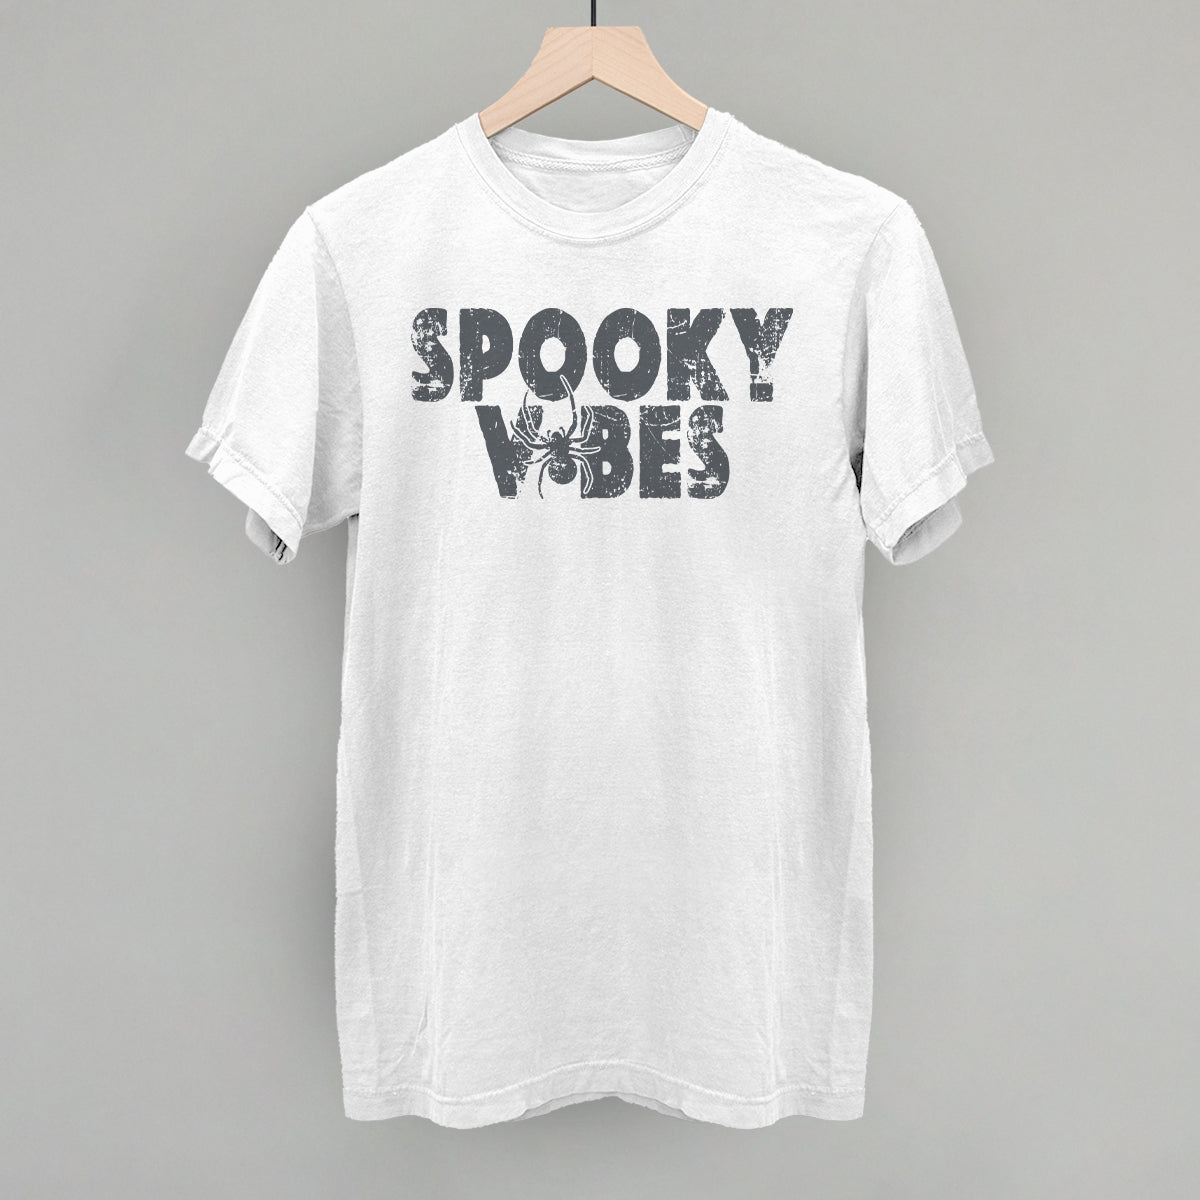 Spooky Vibes Spider Distressed